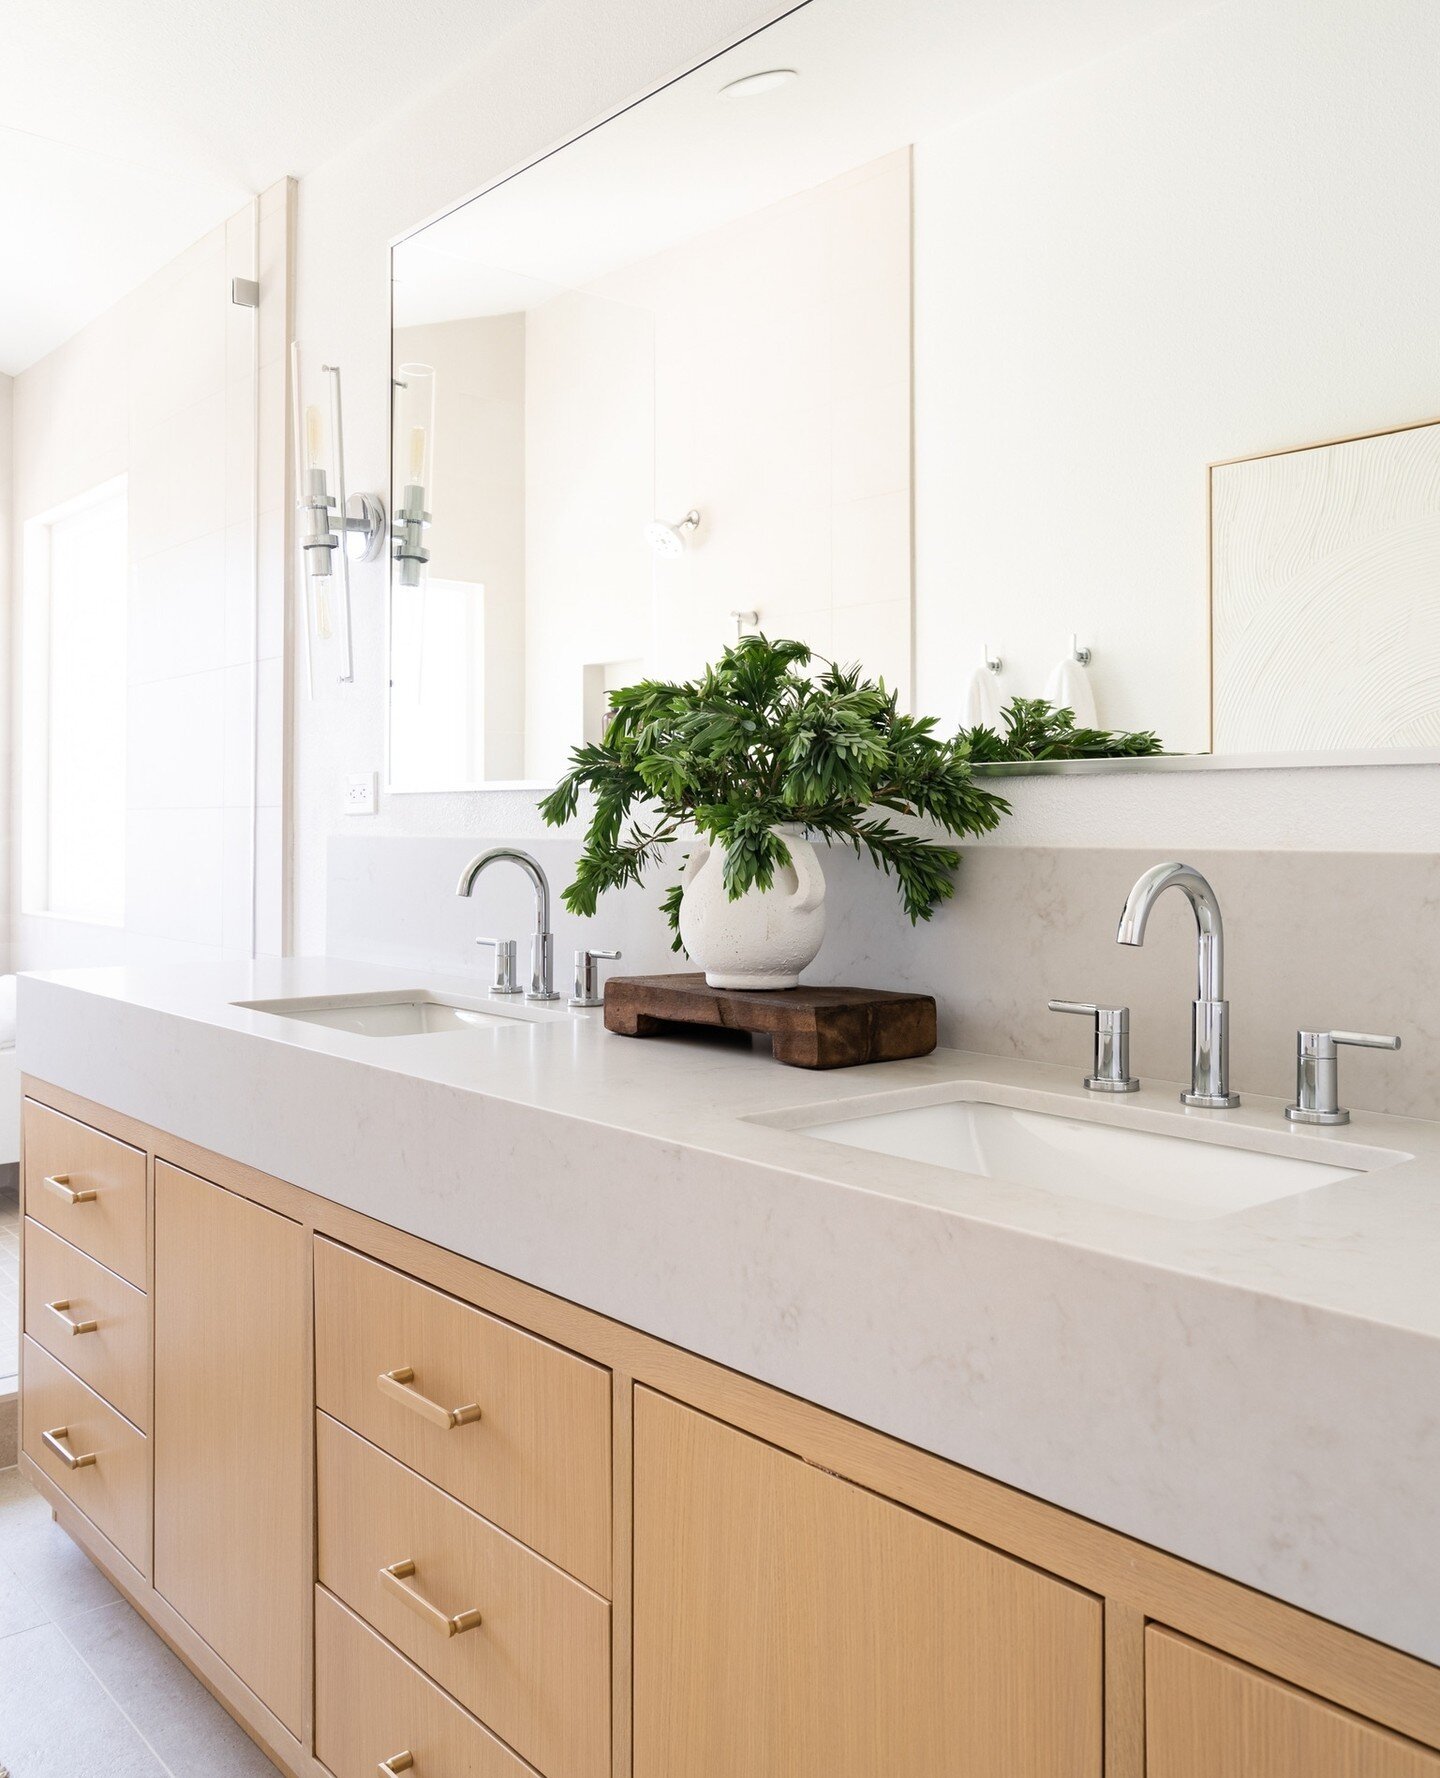 A calming primary bathroom escape with clean lines and neutral colors 🤌⁠
⁠
⁠
⁠
⁠
⁠
📸: @sandiegointeriorphotography⁠
⁠
⁠
⁠
⁠
#avenidasivritaproject #sandiego #interiorinspo #myseasonalstyling #interiorforall #interiorinspiration #interiorstyle #inte